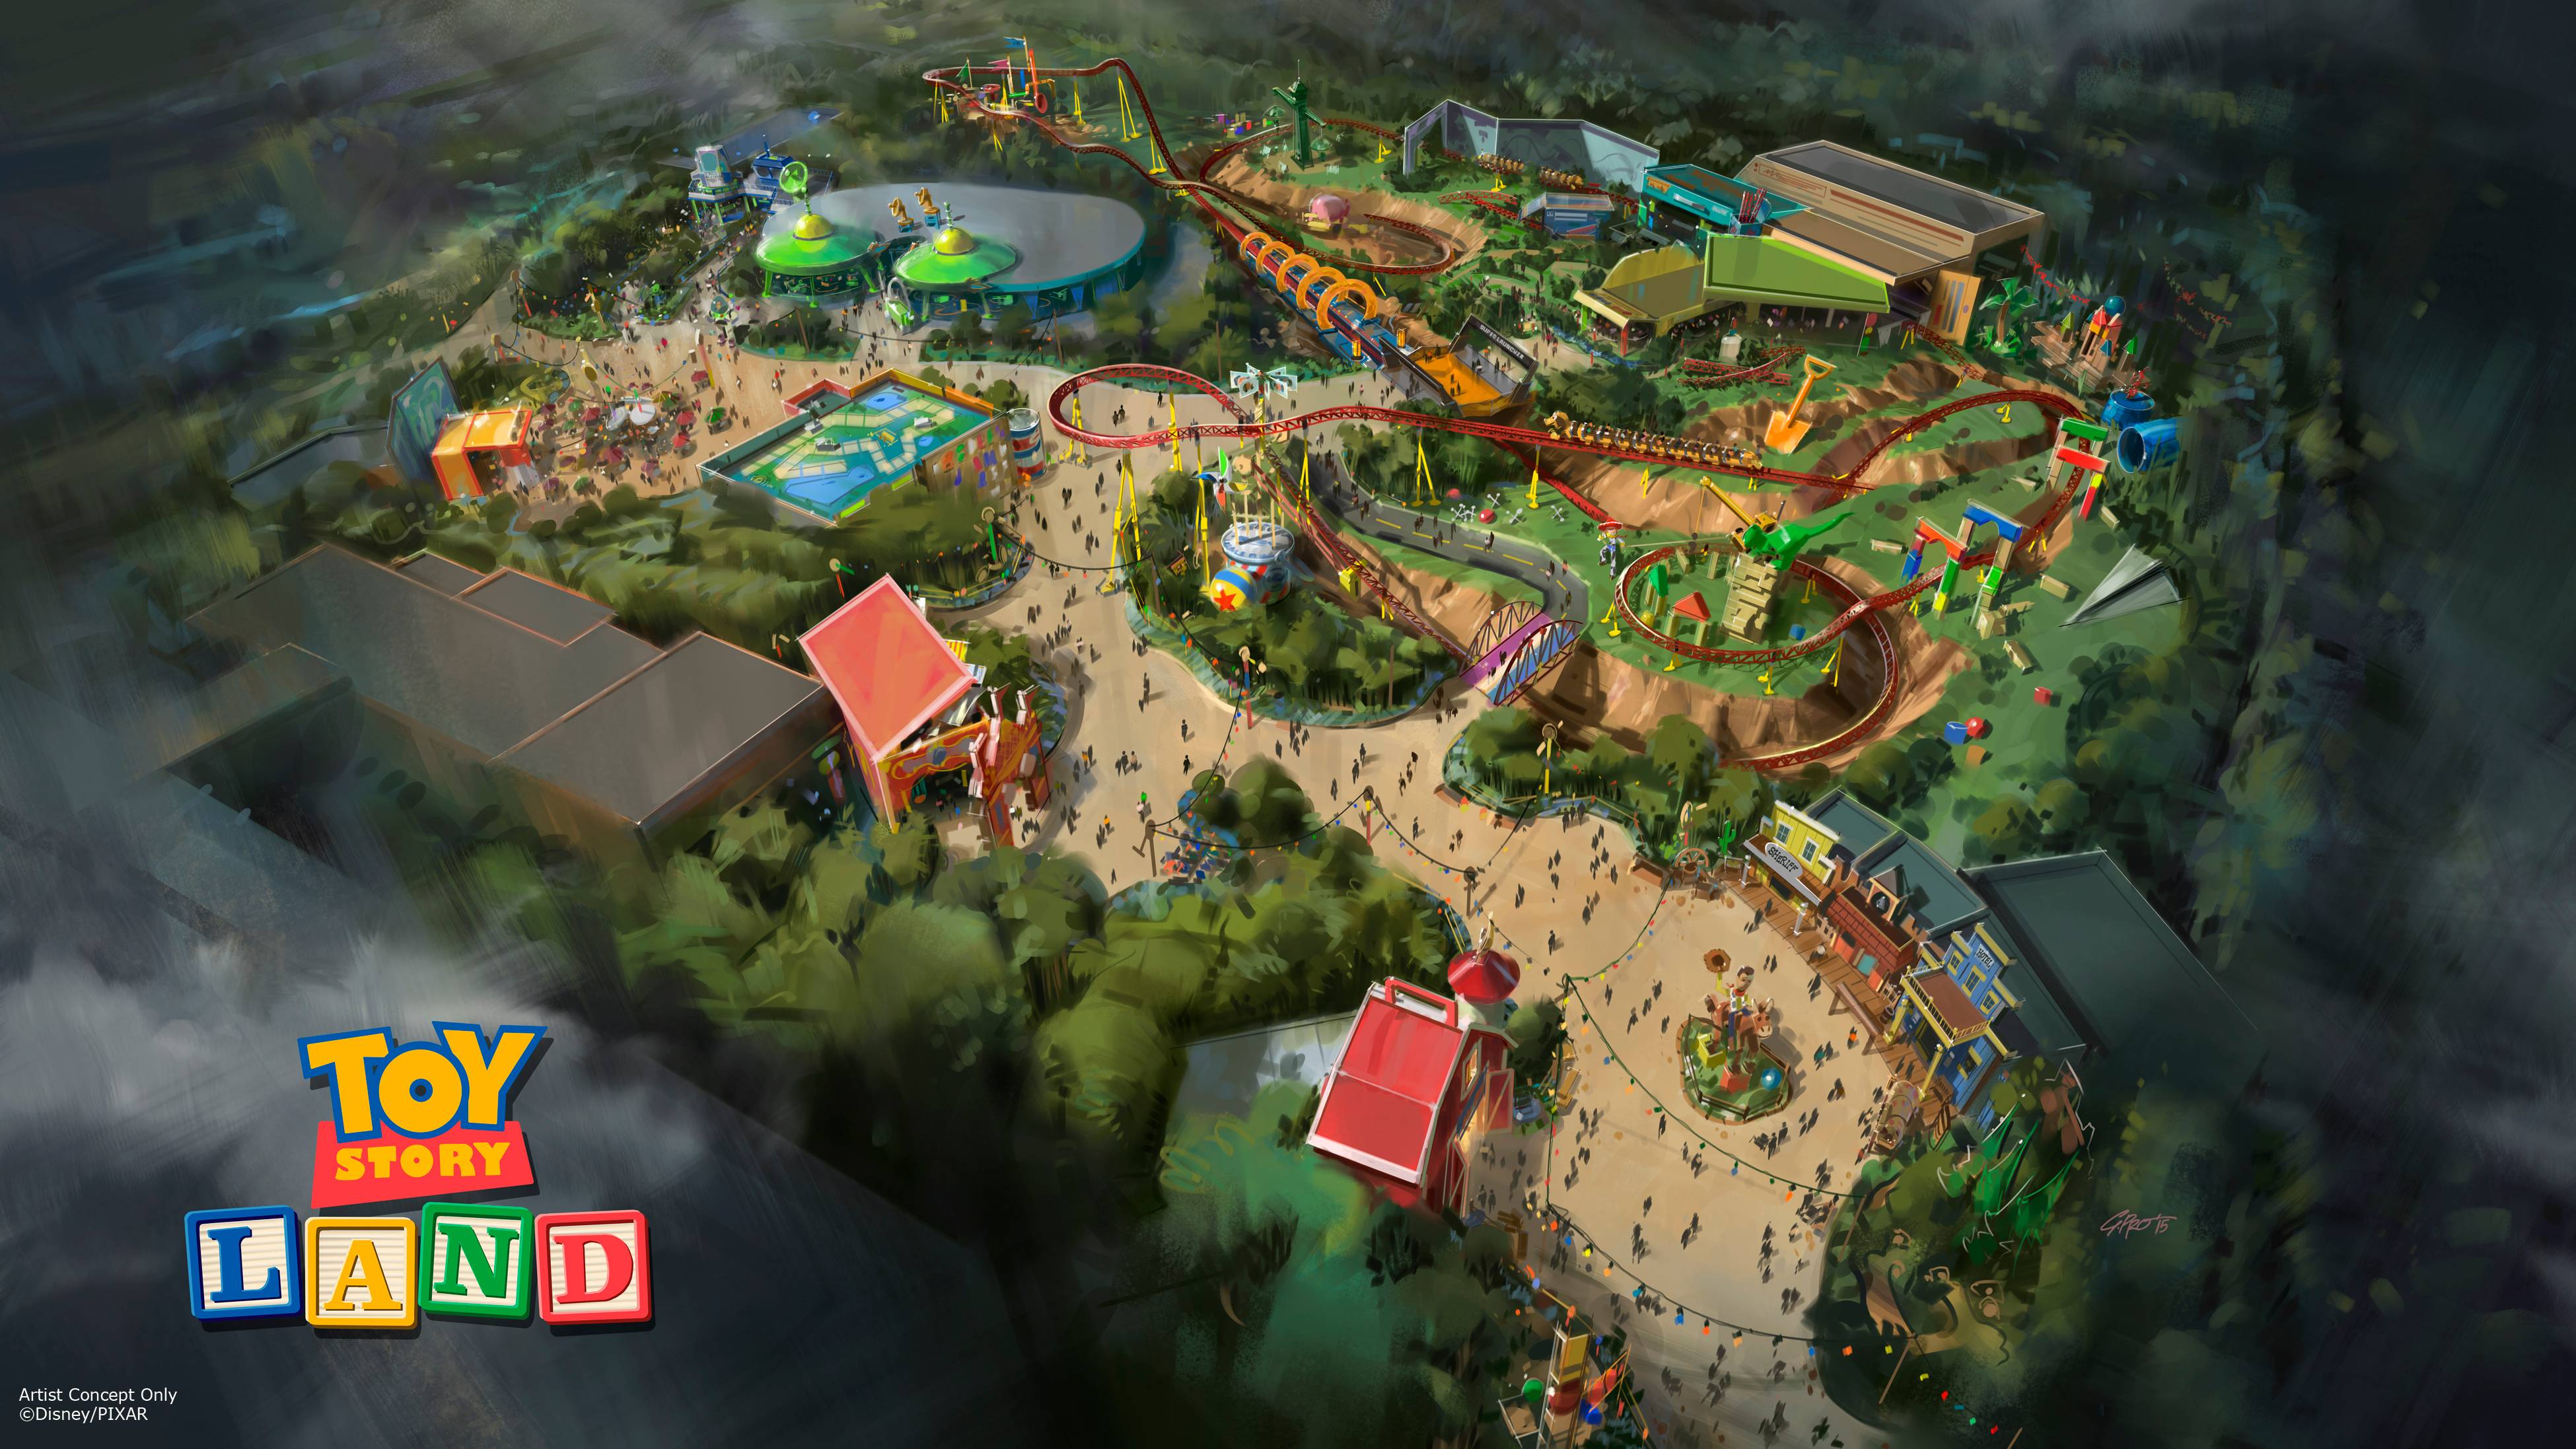 VIDEO - Concept video of Toy Story Land's family coaster 'Slinky Dog Dash' and details of Alien Swirling Saucers